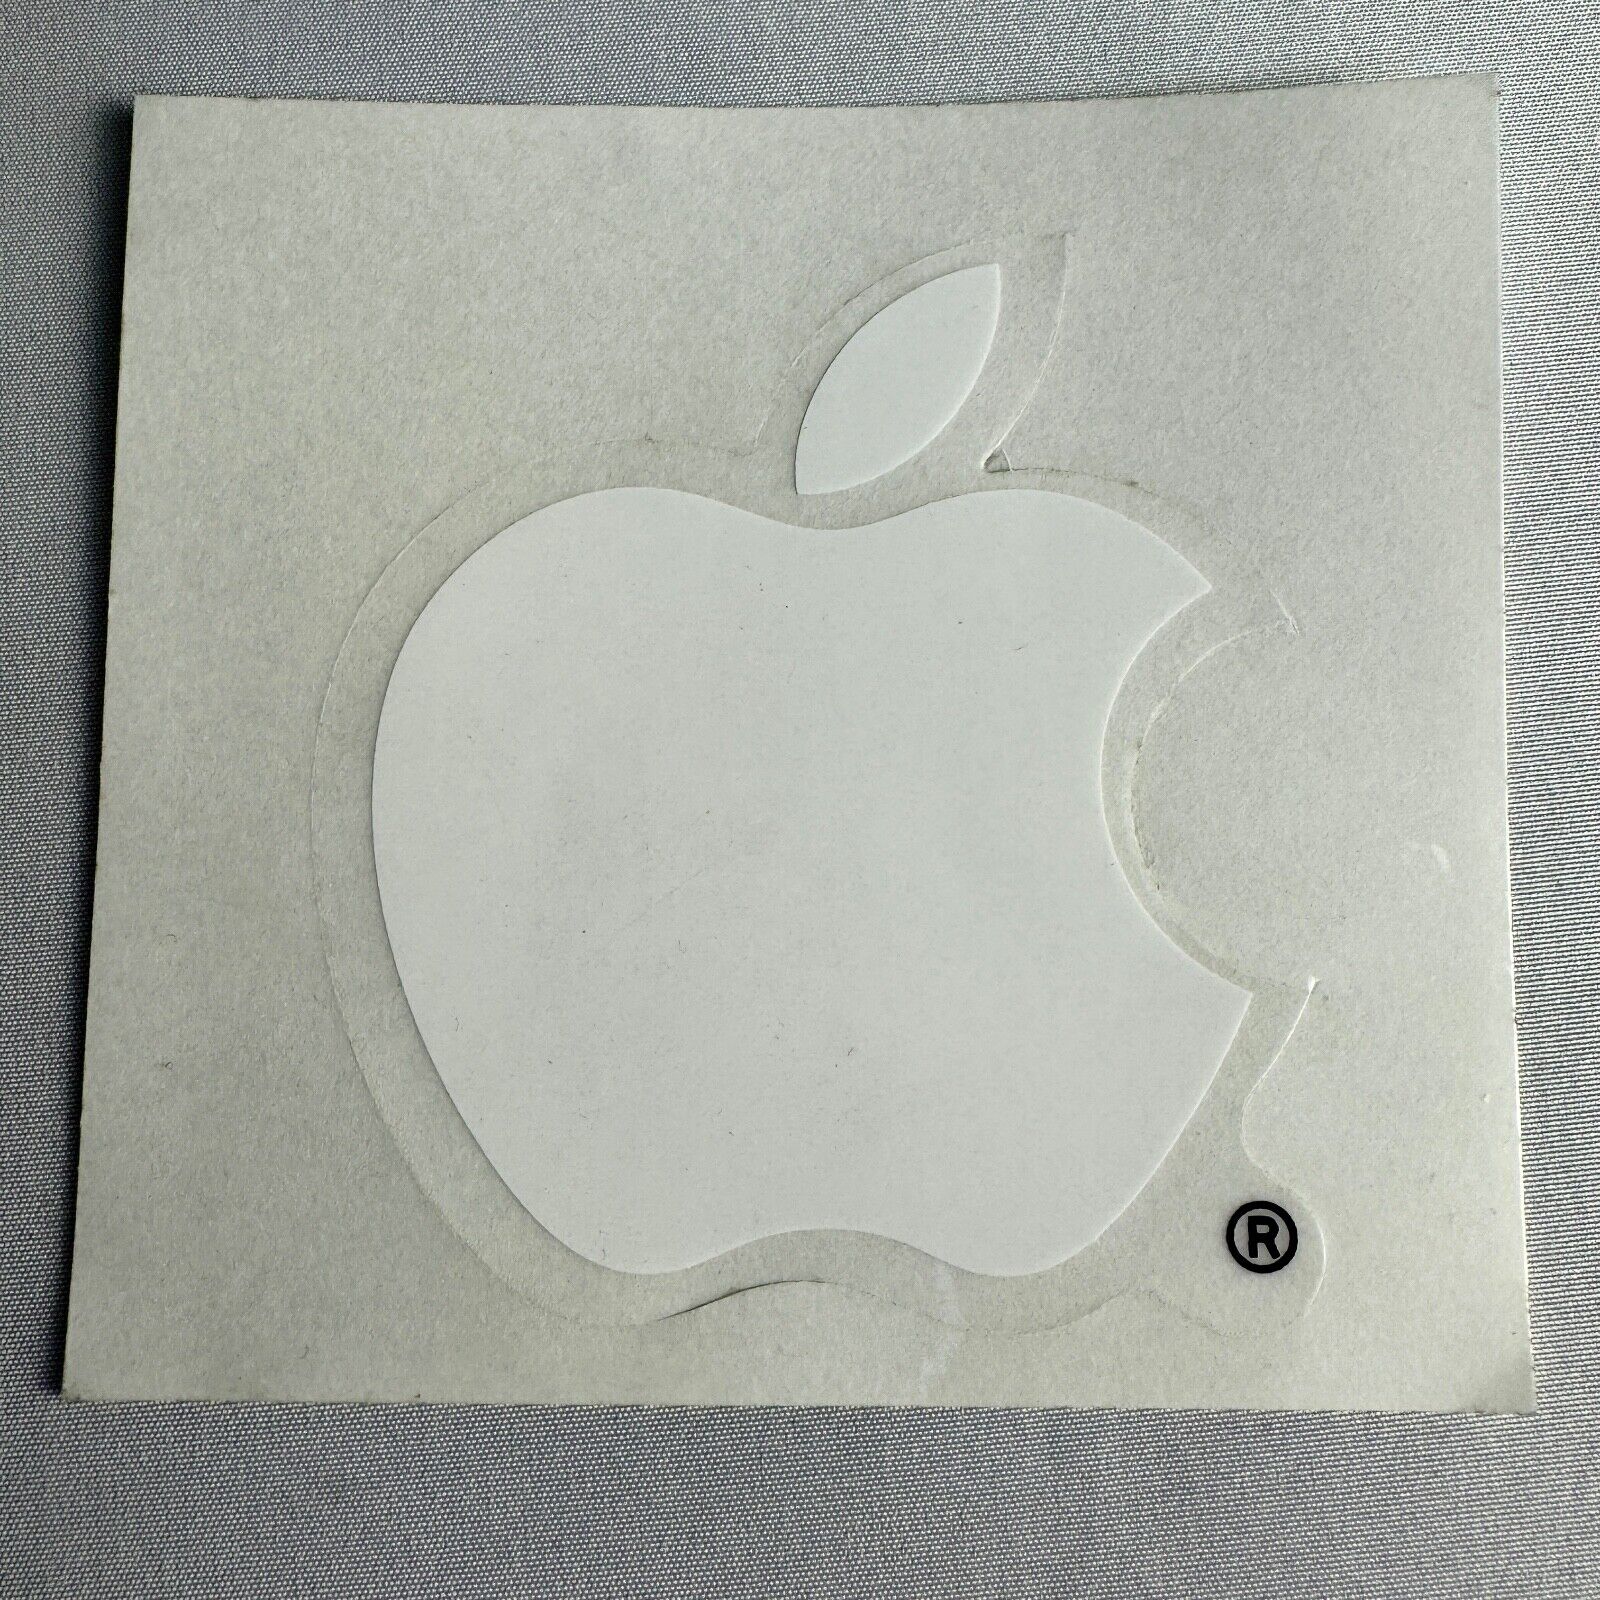 Vintage Authentic Mac Apple Logo White Sticker, Decal with register mark RARE